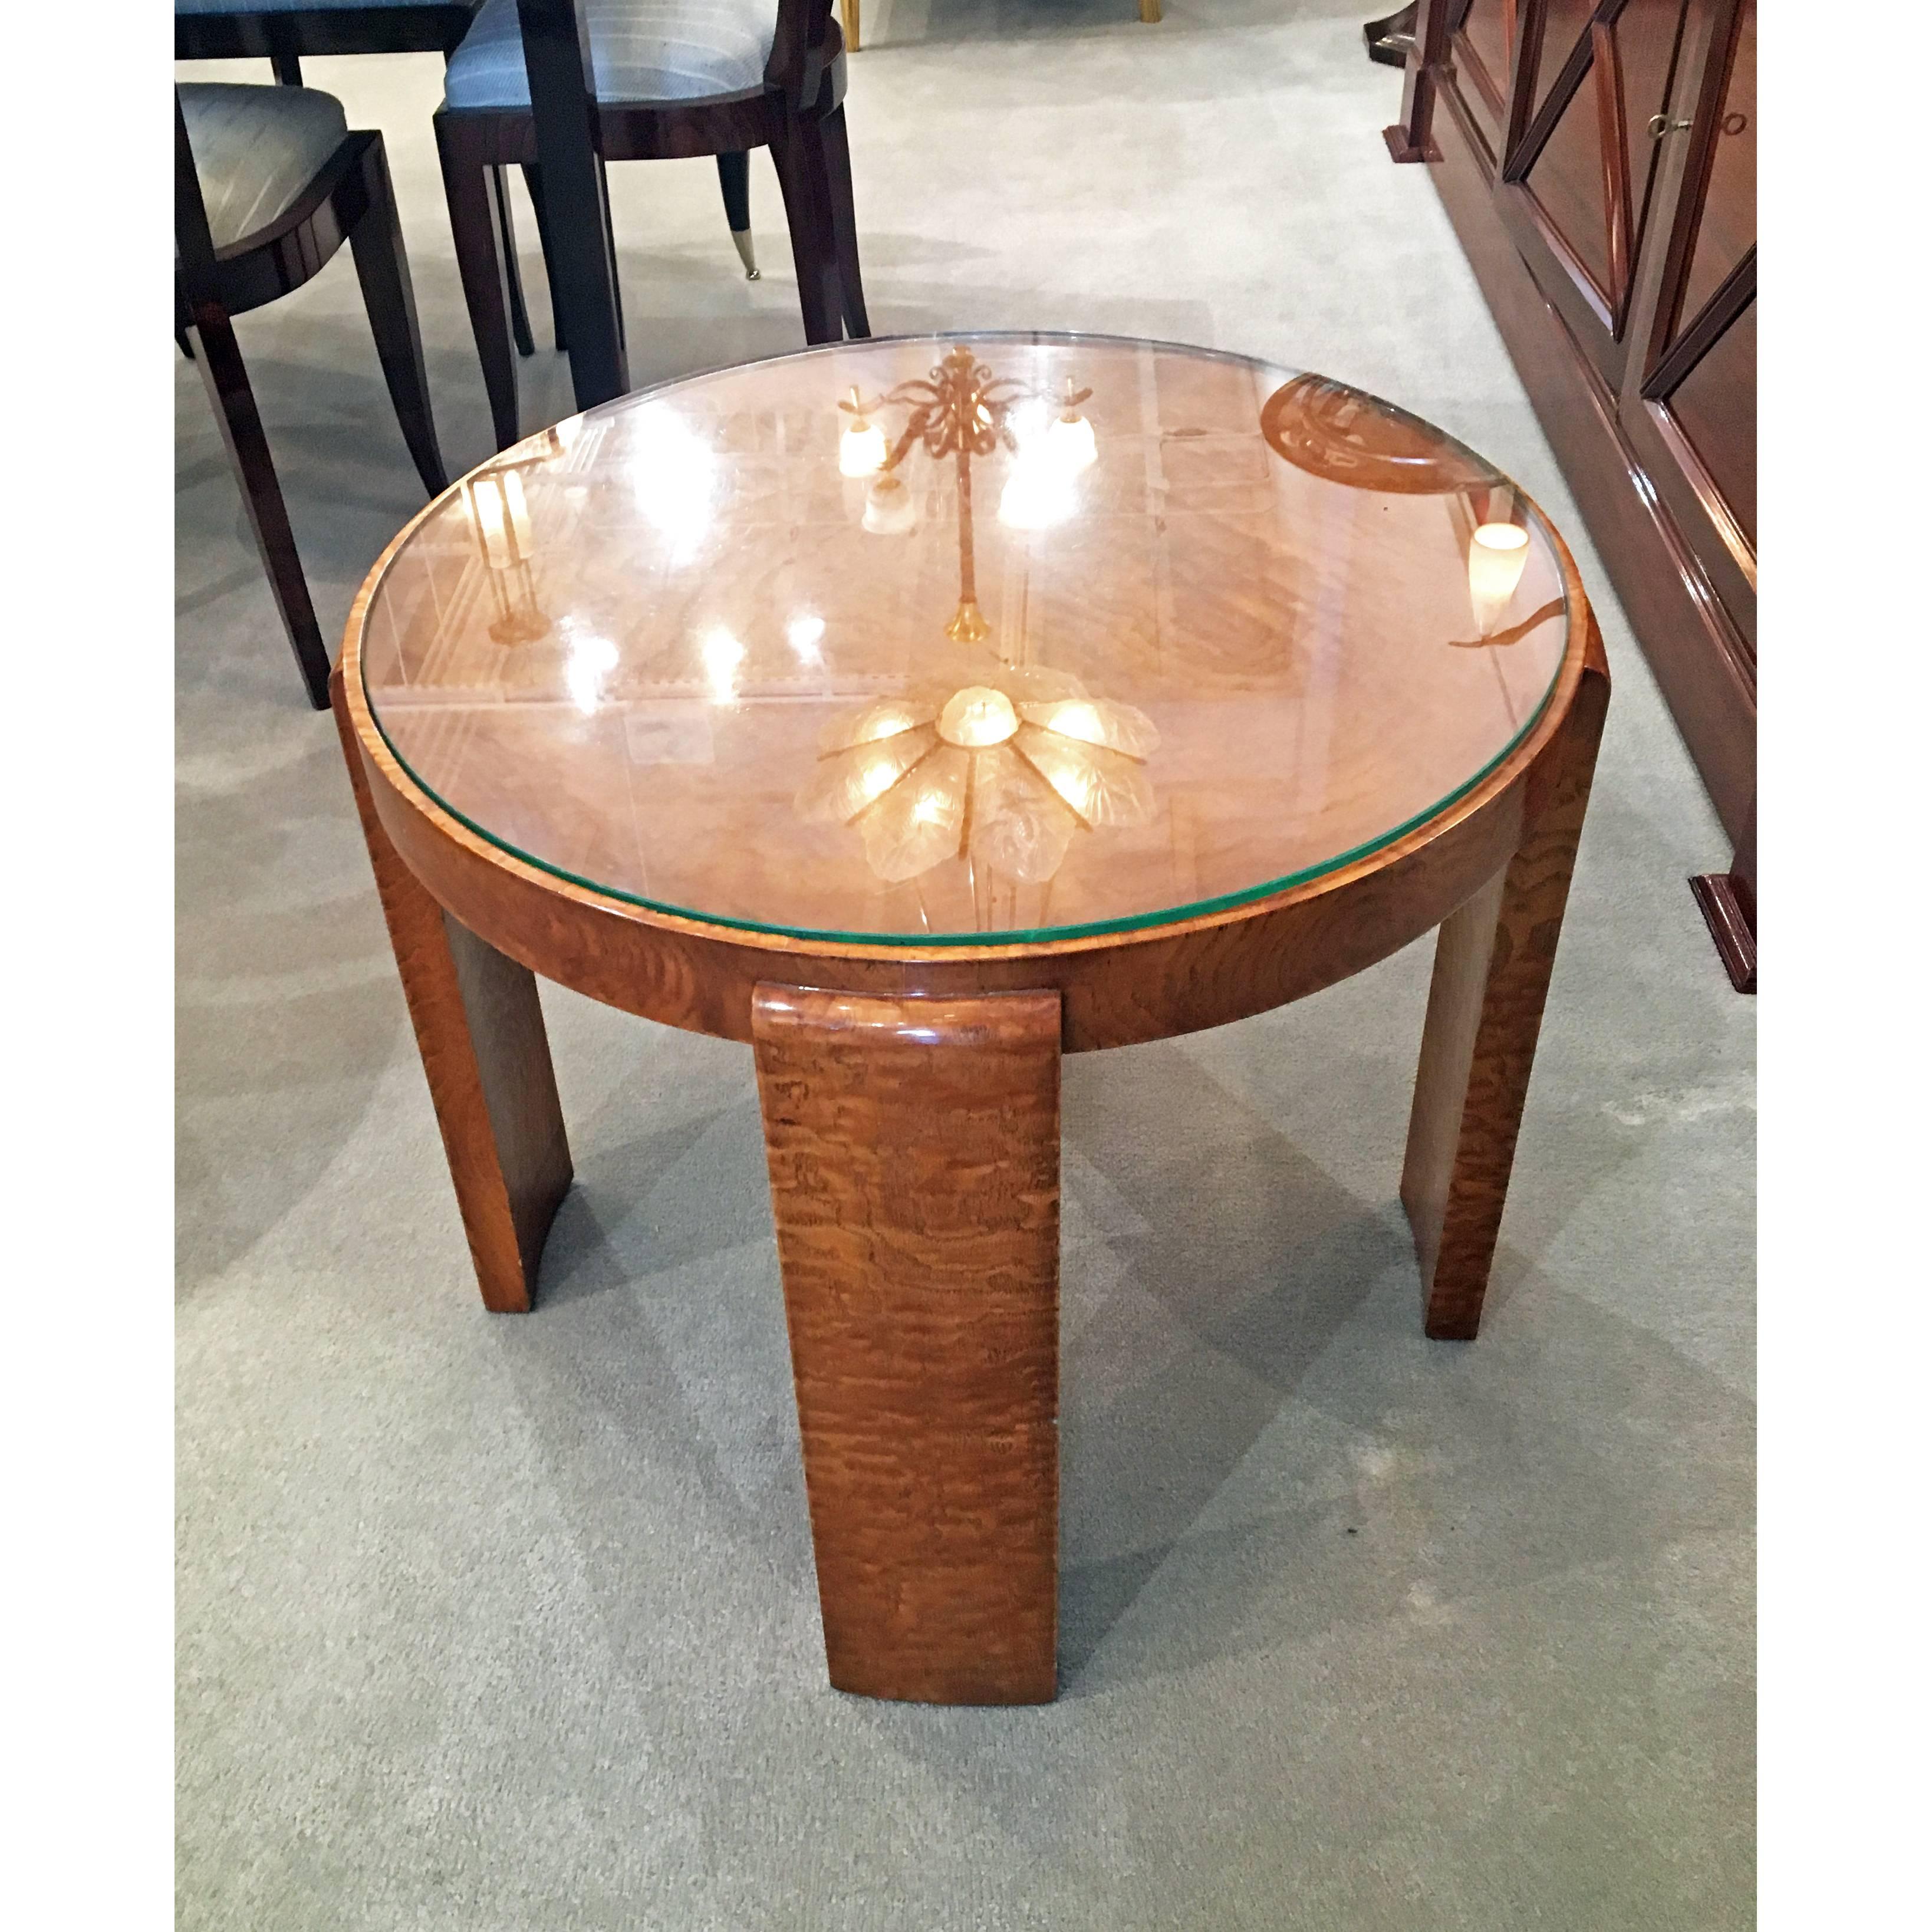 Art Deco round table made of Amboyna wood with a glass top by Jacques Adnet.
Made in France, 
circa 1940
Reference: same piece shown Jacques Adnet by Alain-Rene Hardy - Gaelle Millet, Page 41.